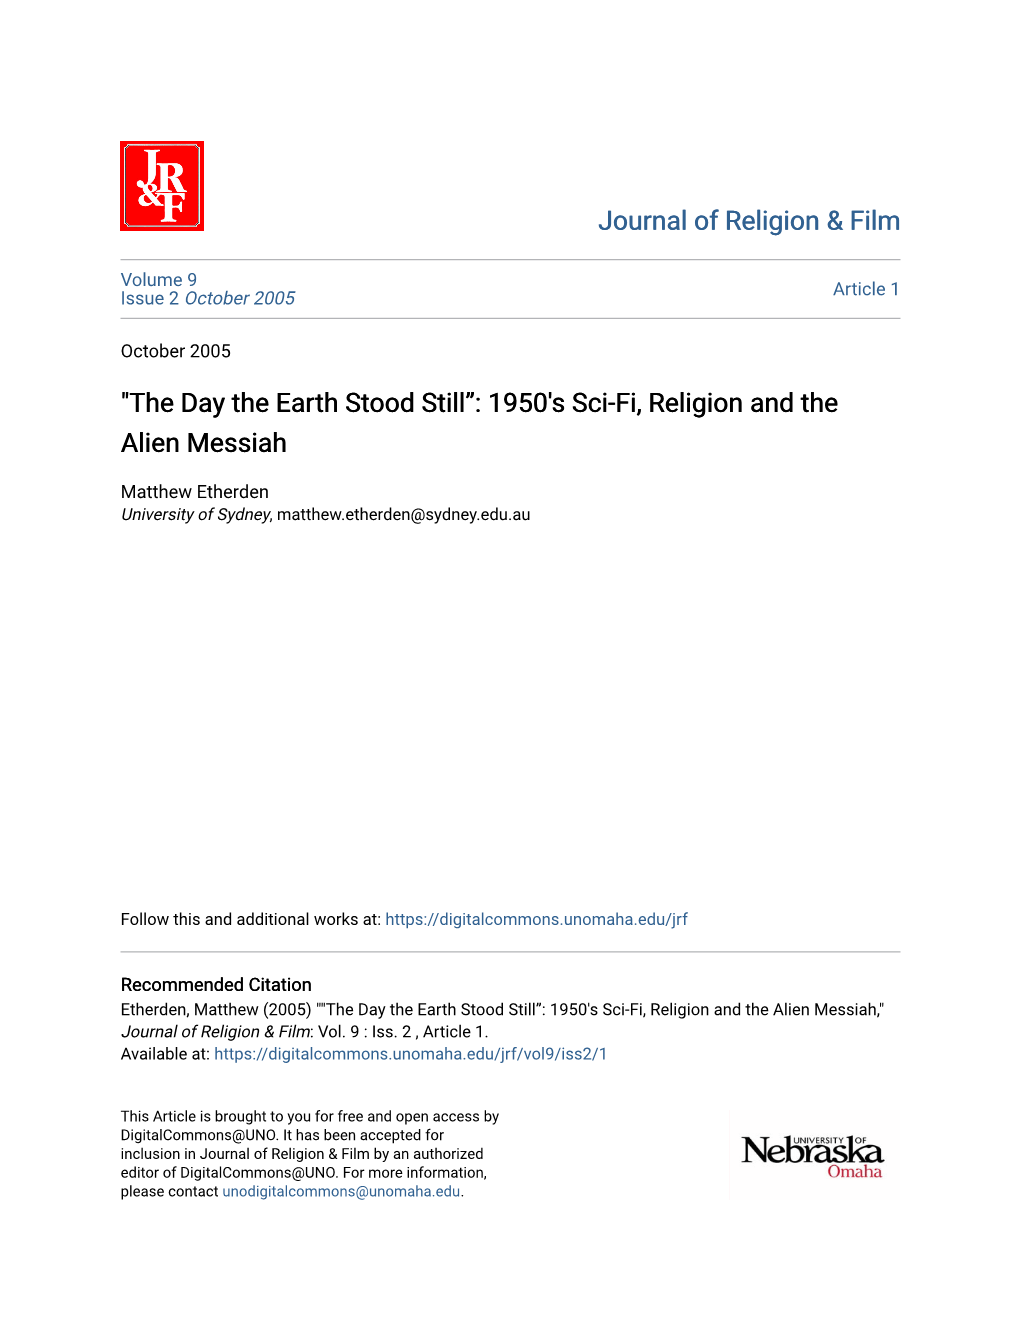 The Day the Earth Stood Still”: 1950'S Sci-Fi, Religion and the Alien Messiah